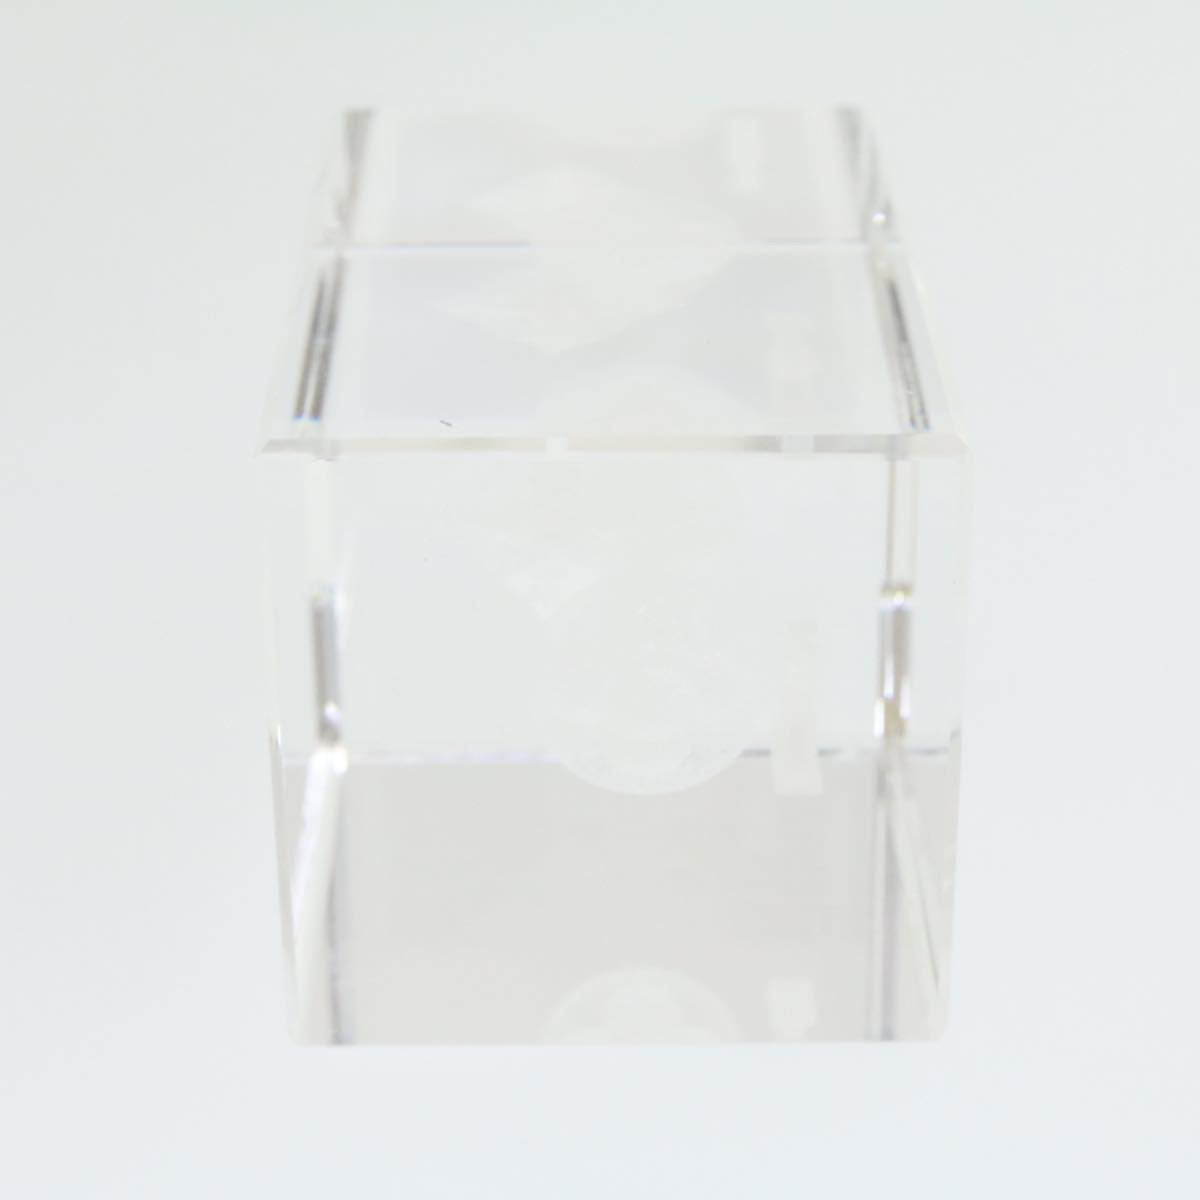 LOUIS VUITTON Paper Weight Crystal Glass Clear LV Auth 21193